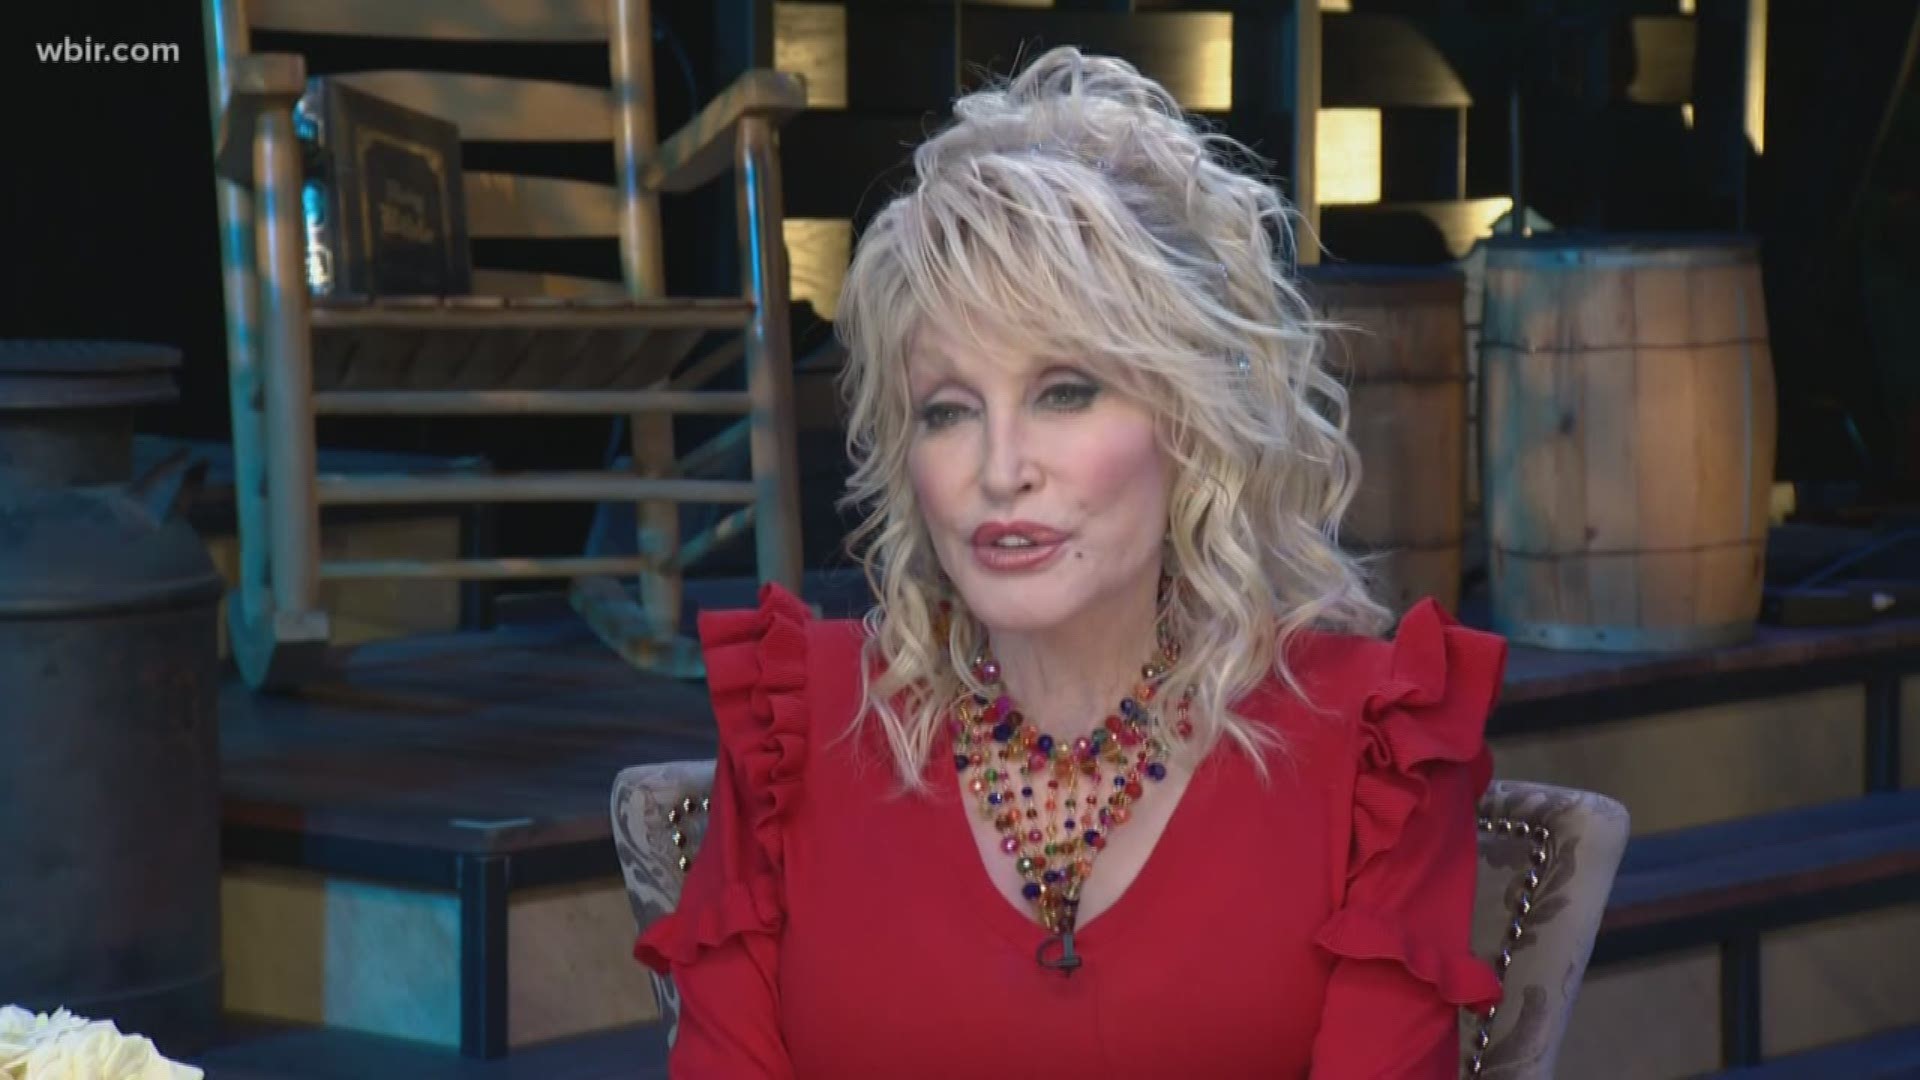 Dolly Parton opens Dollywood for the 2019 season. The season starts with Festival of Nations and will continue with the opening of Wildwood Grove on May 10. For more information visit dollywood.com. March 15, 2019-4pm